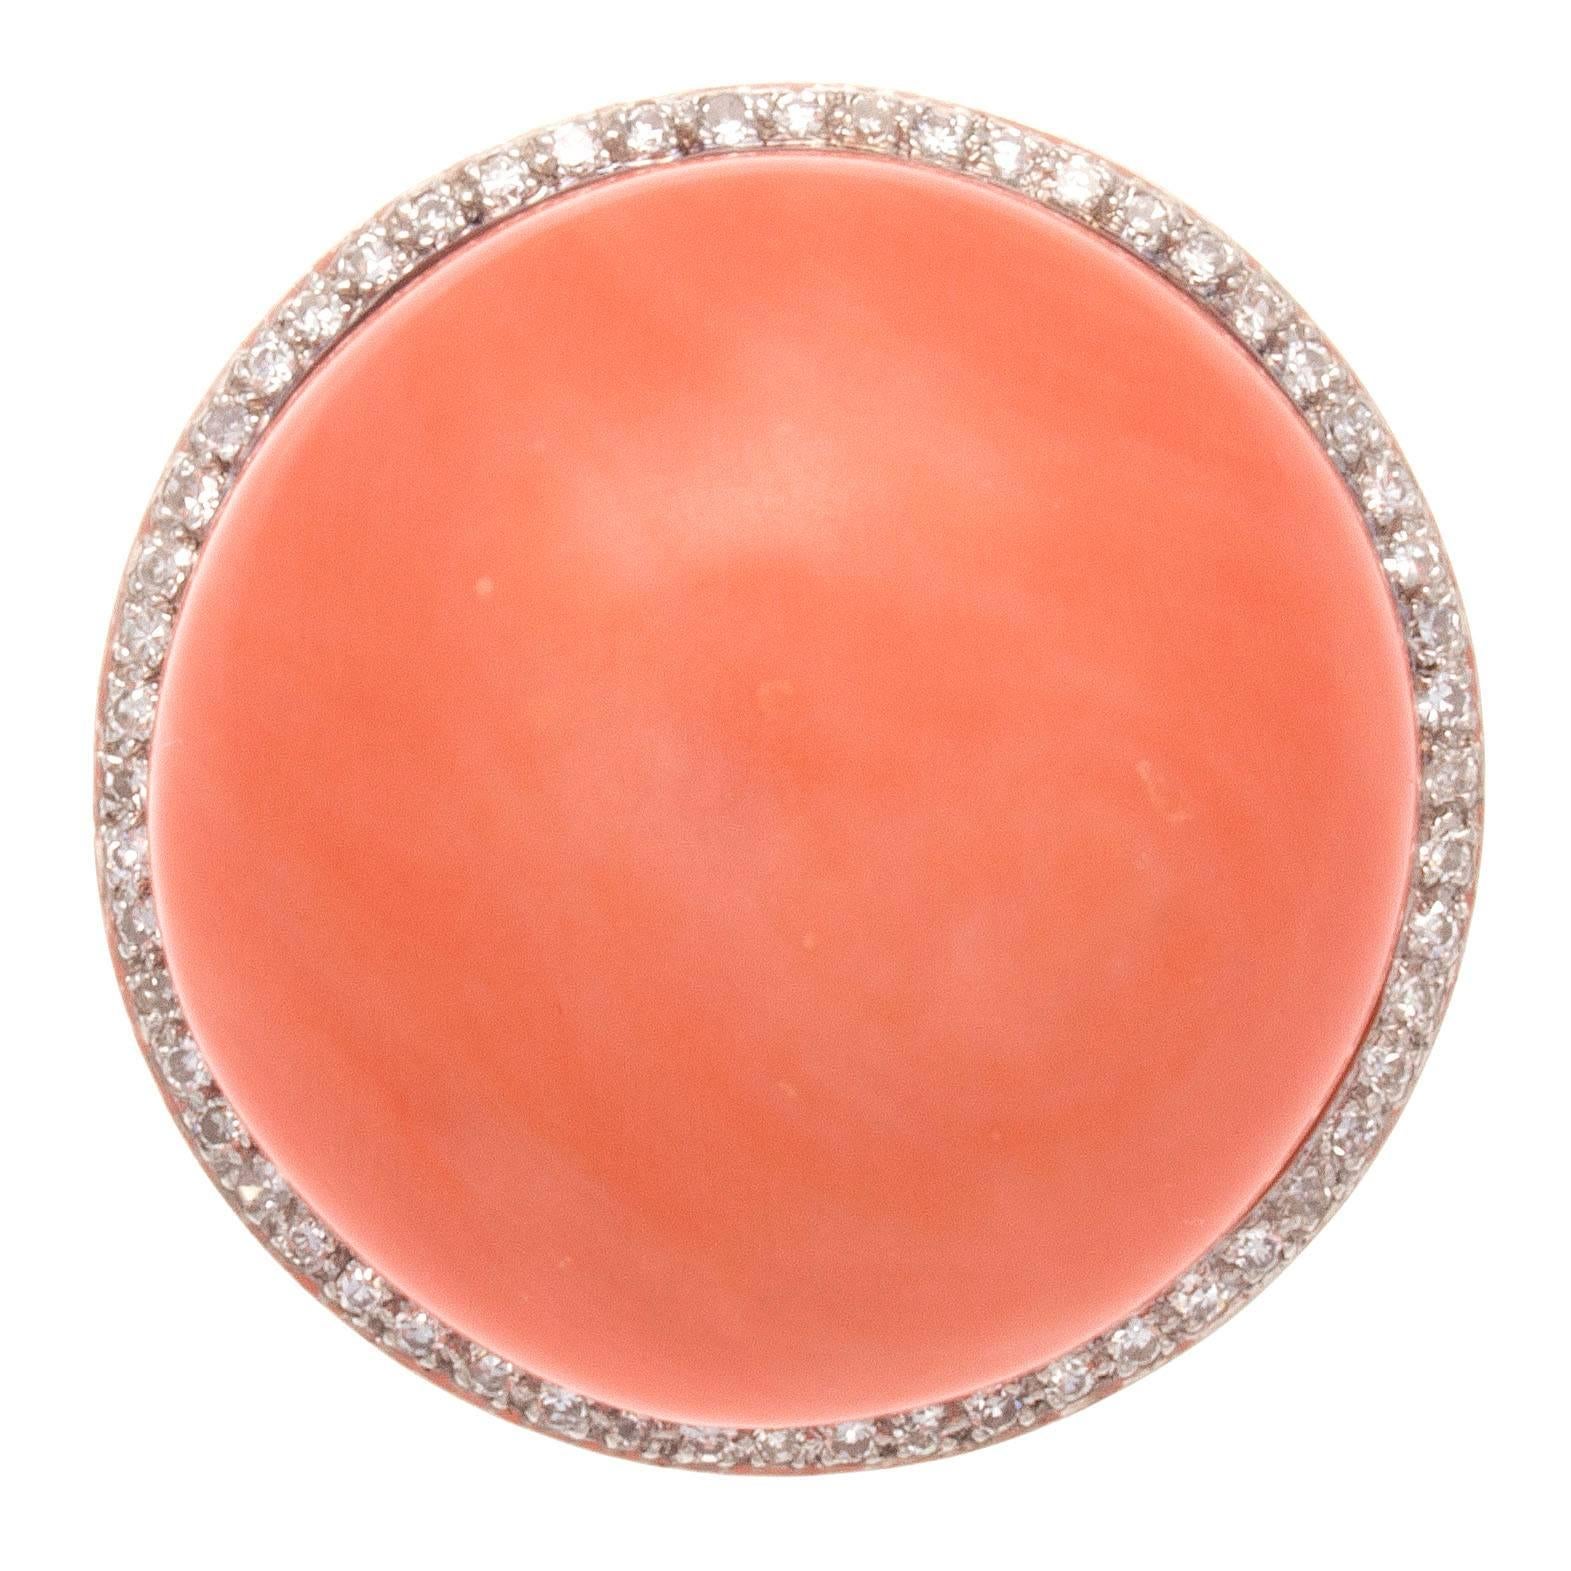 A retro creation that is true to its larger than life time period. Designed with substantial large orangish-red cabochon cut coral and surrounded by a halo of clean, white diamonds. Hand crafted in an intricate 14k white gold design.

Diameter 1